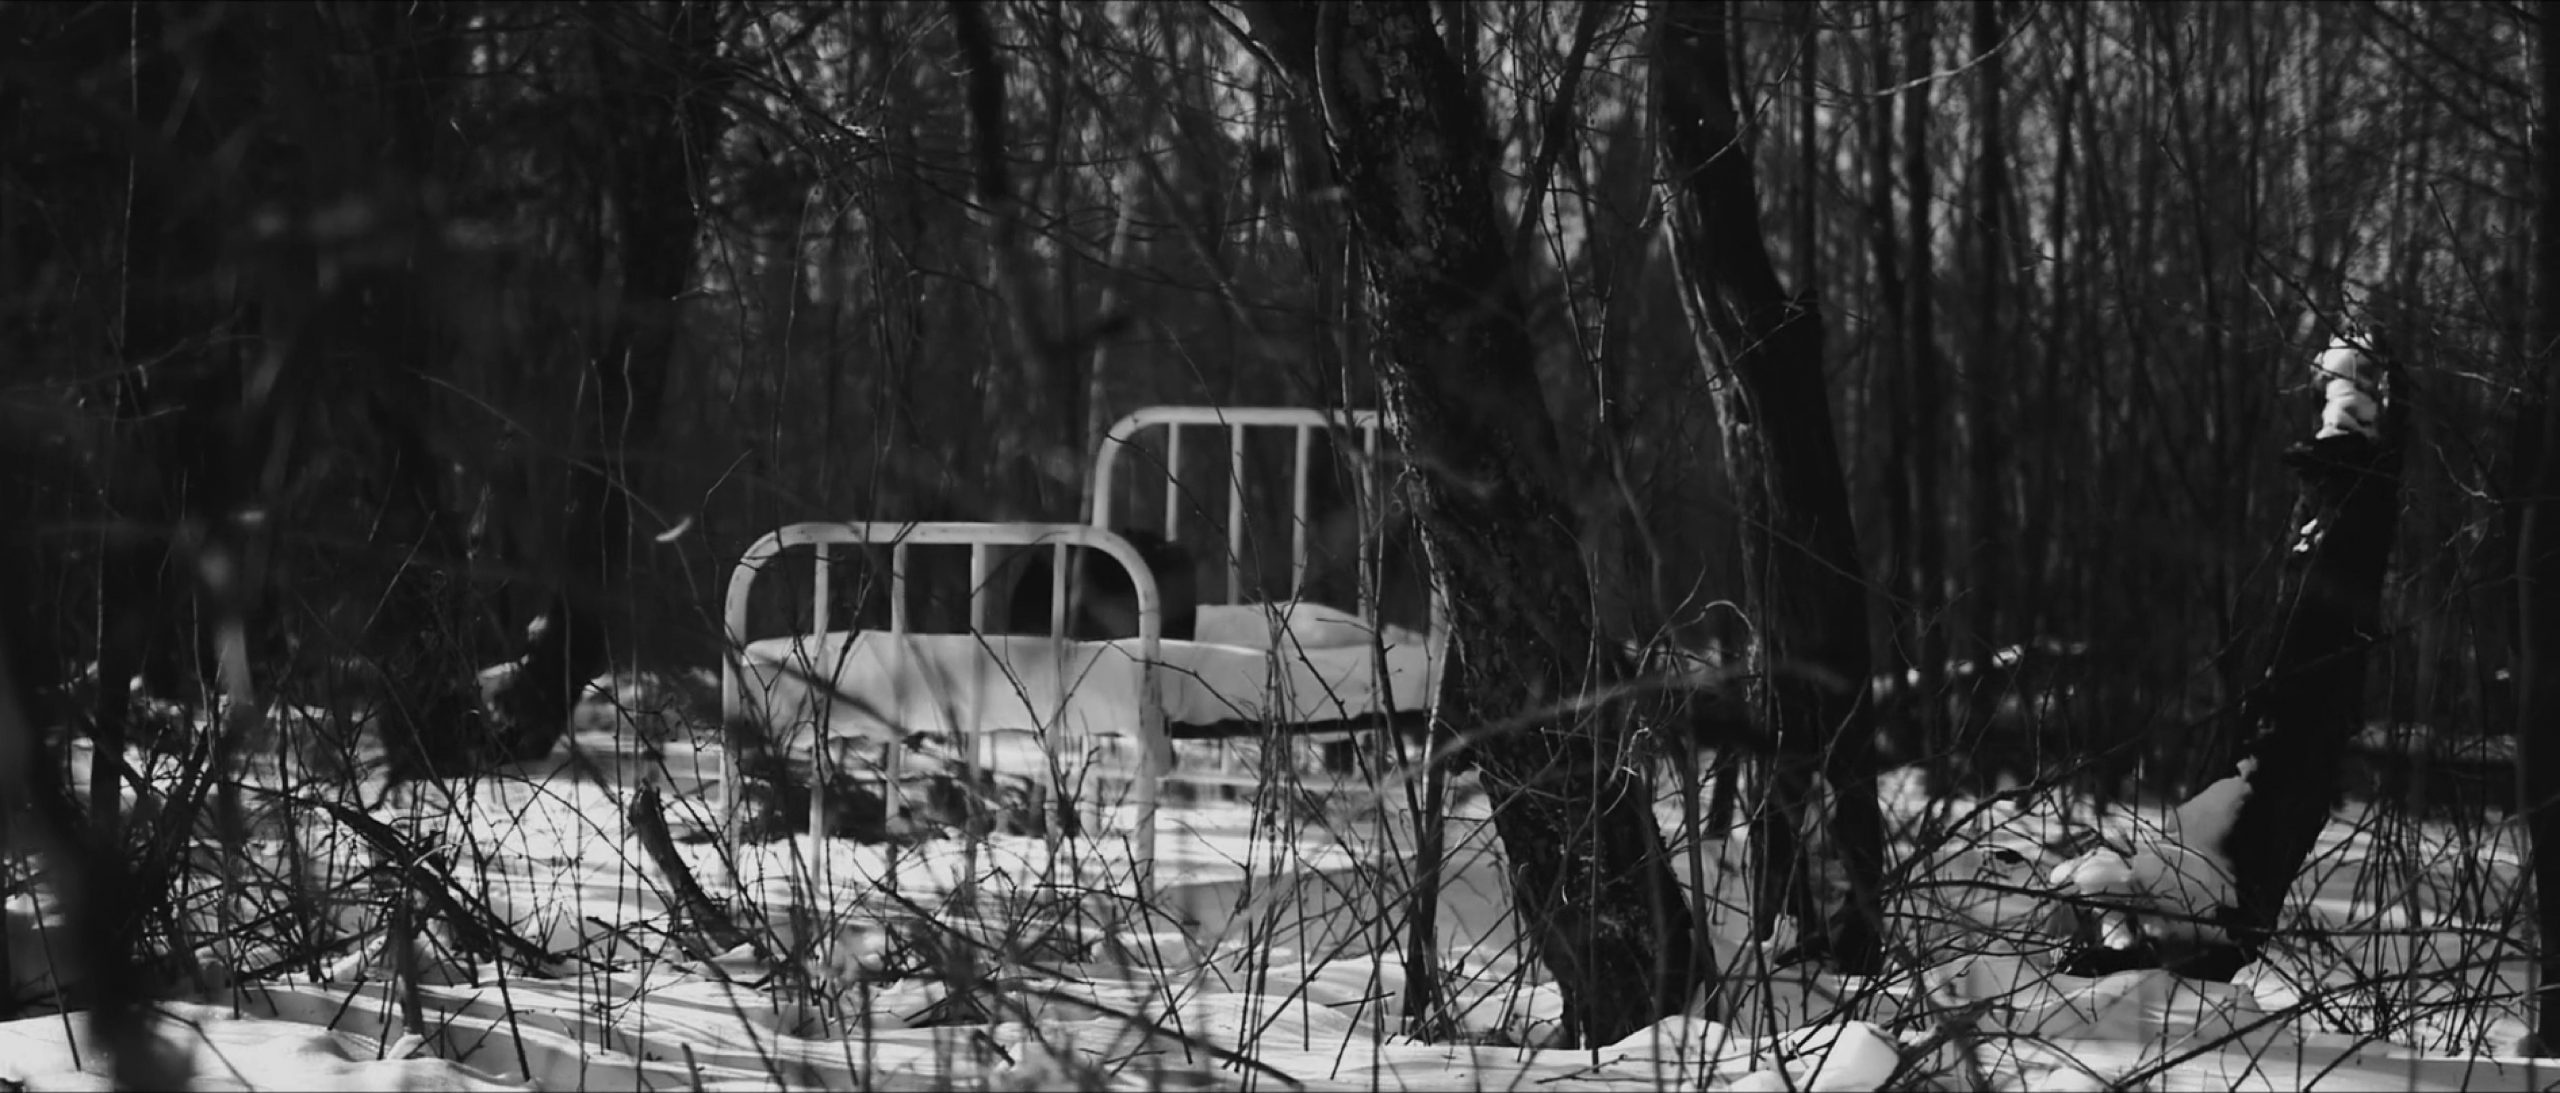 A black and white photo of a bed frame sitting in a snowy forest clearing.